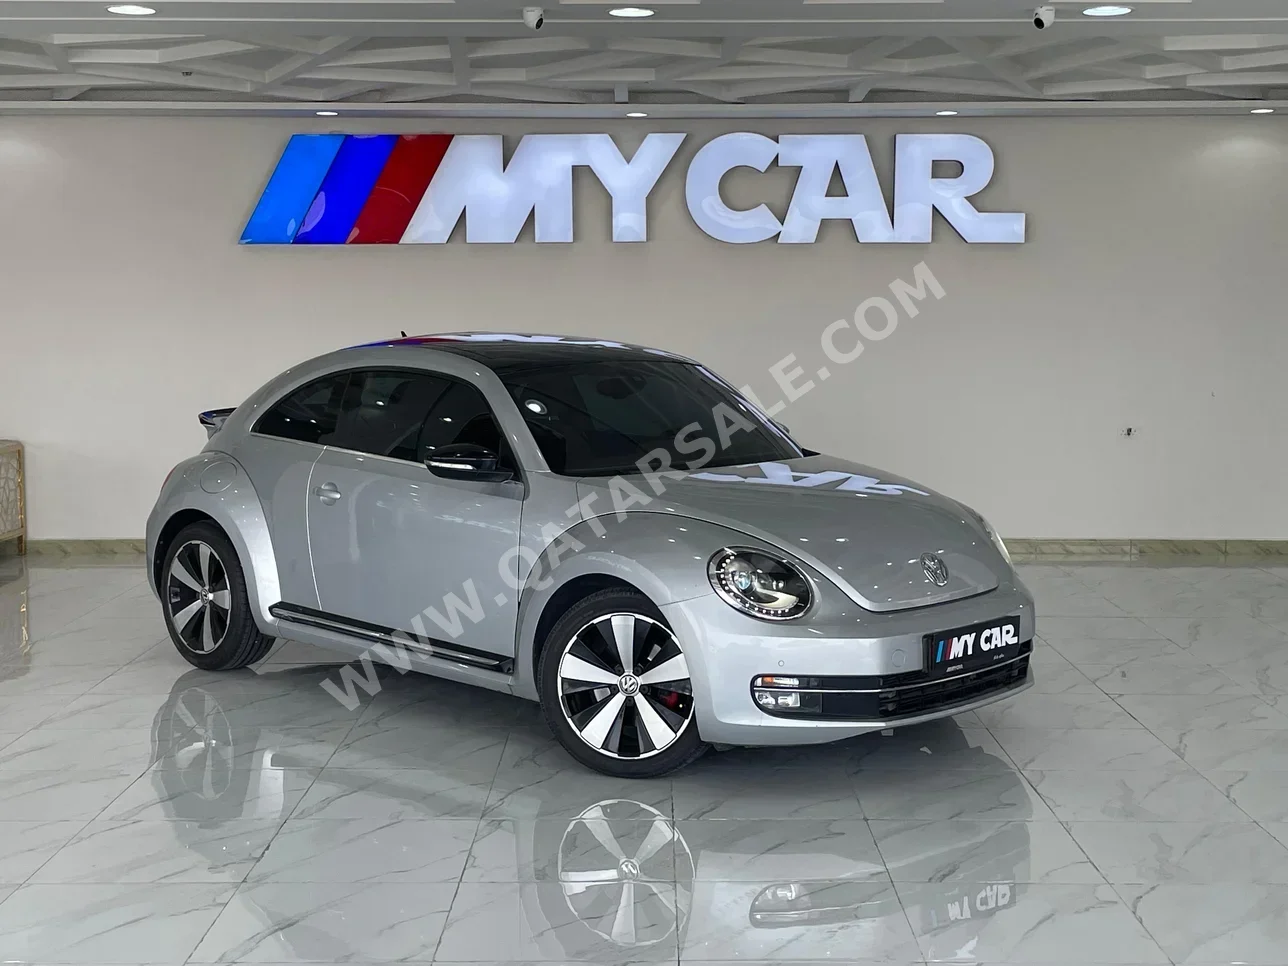 Volkswagen  Beetle  Turbo  2016  Automatic  88,000 Km  4 Cylinder  Front Wheel Drive (FWD)  Hatchback  Silver